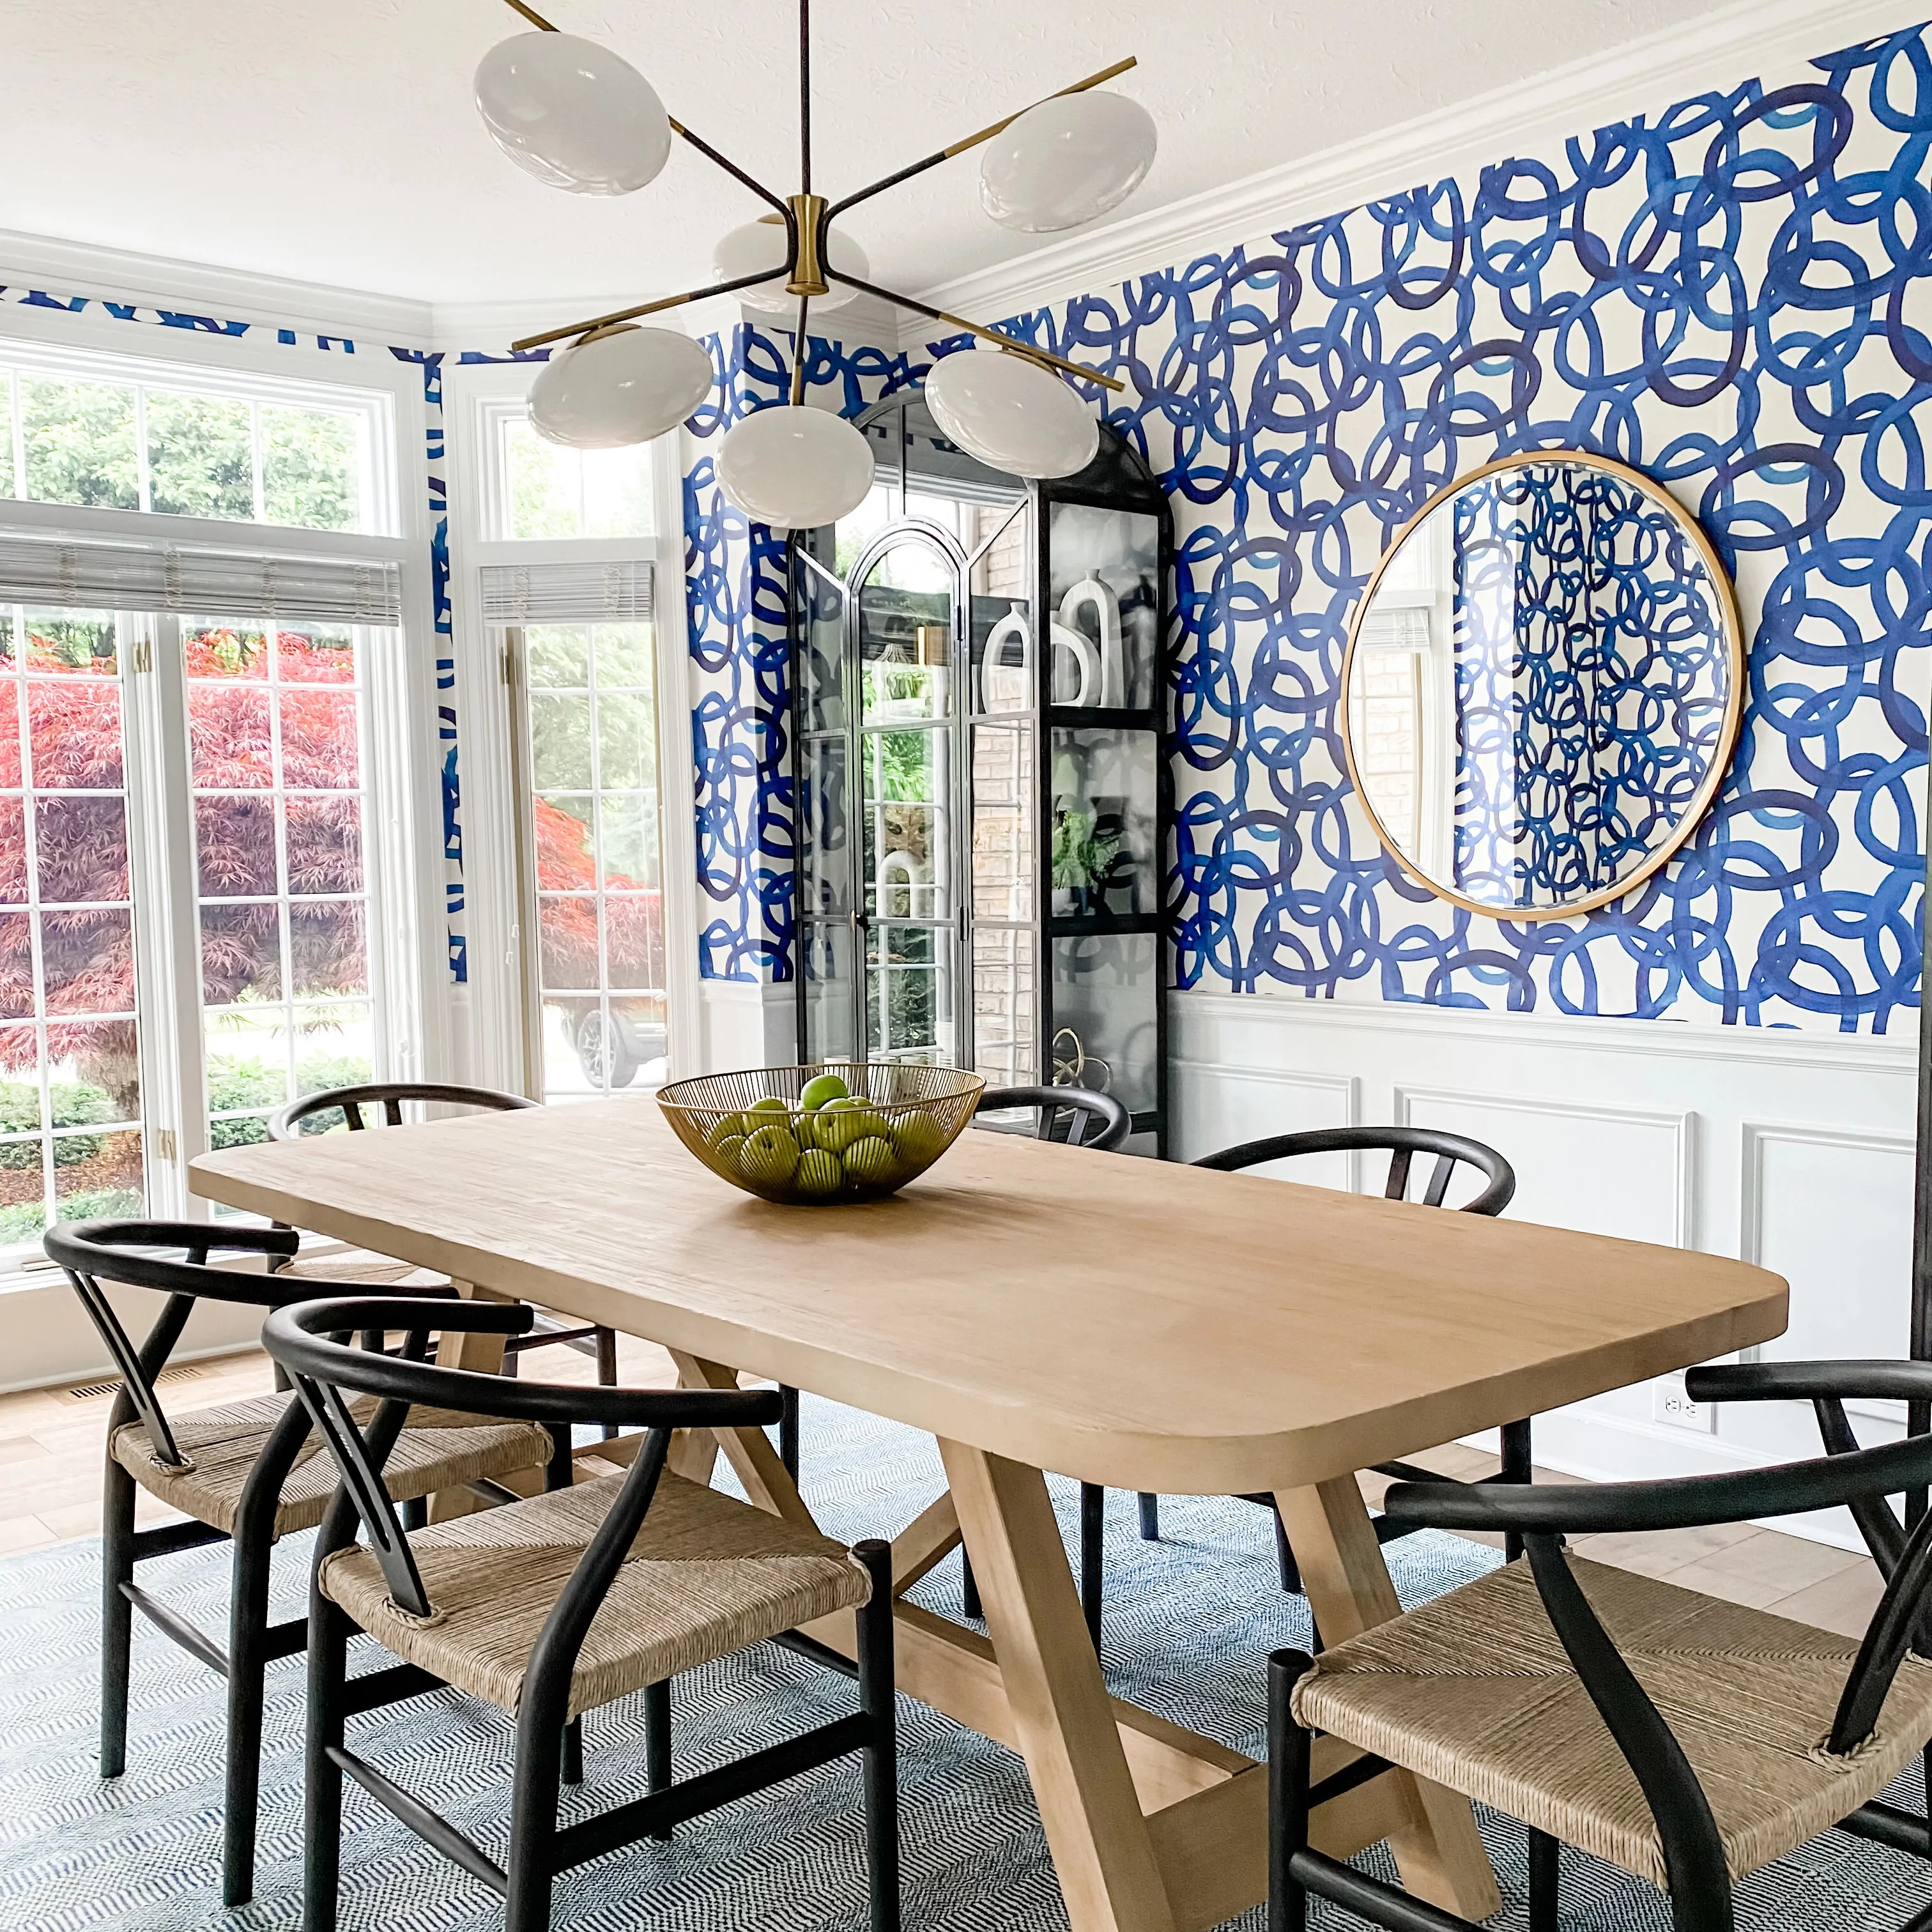 Dining room with blue circles wallpaper